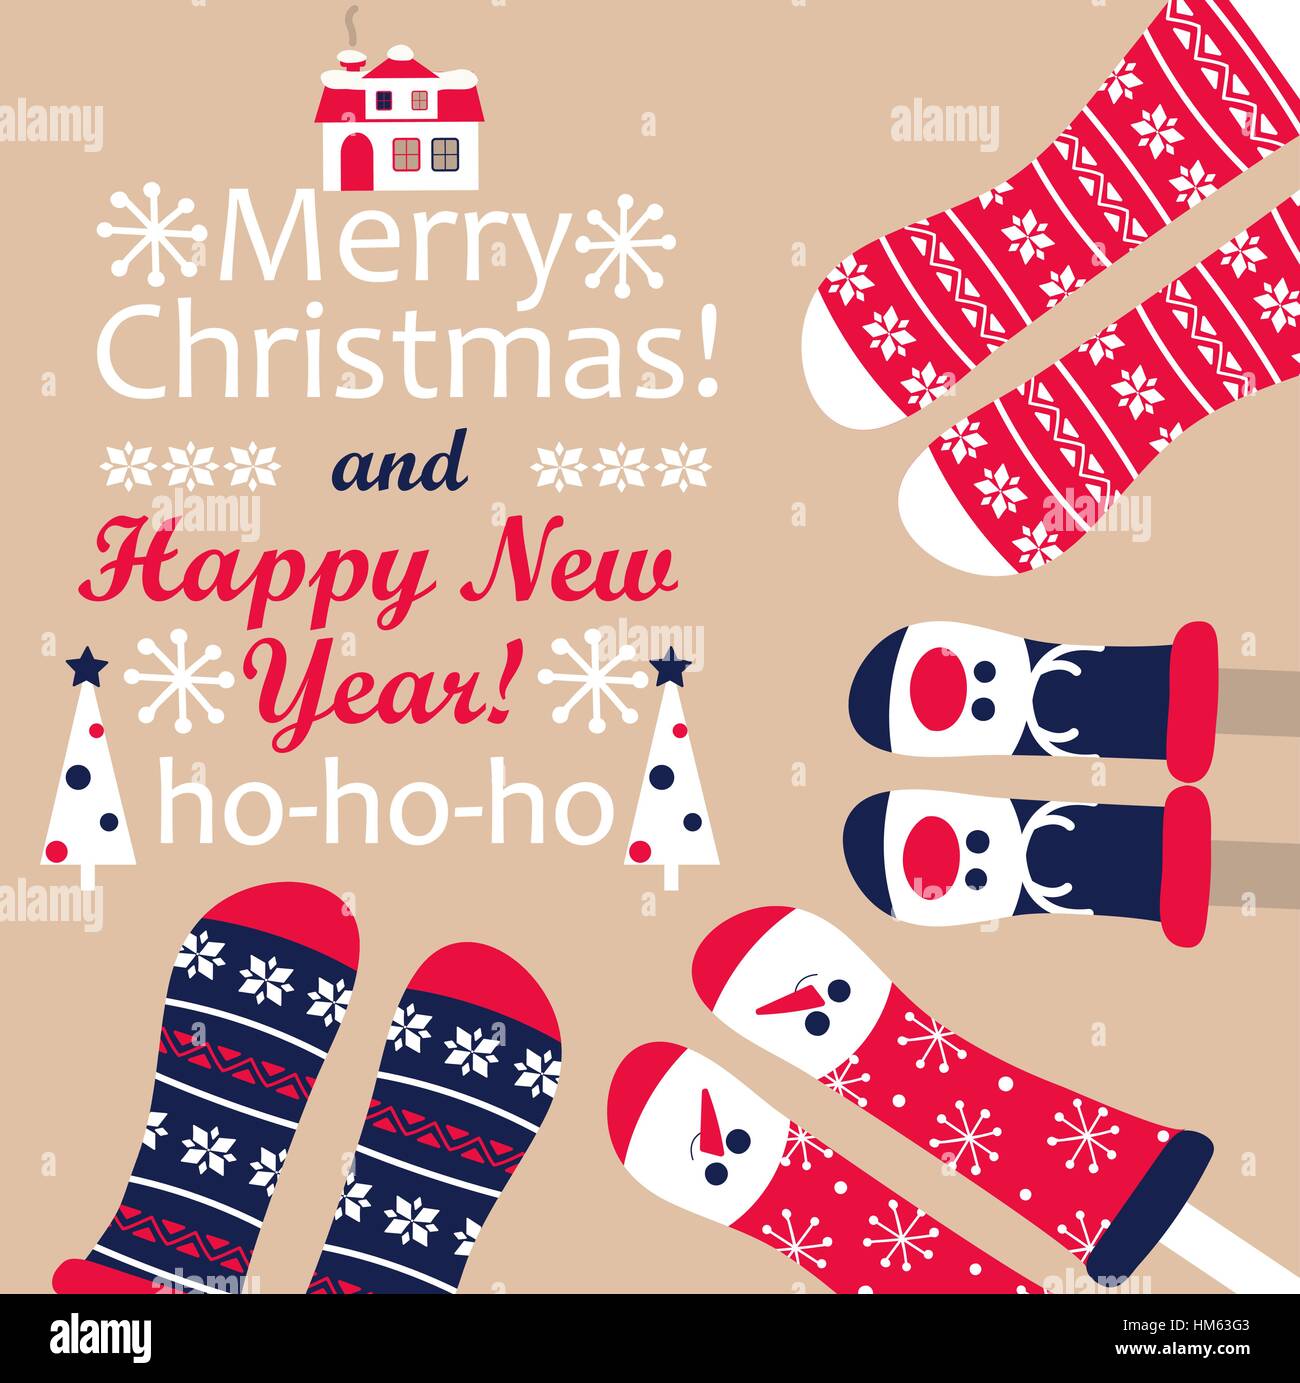 Family feet in Christmas socks. Winter holiday concept. Happy new year Greeting Card. Stock Vector